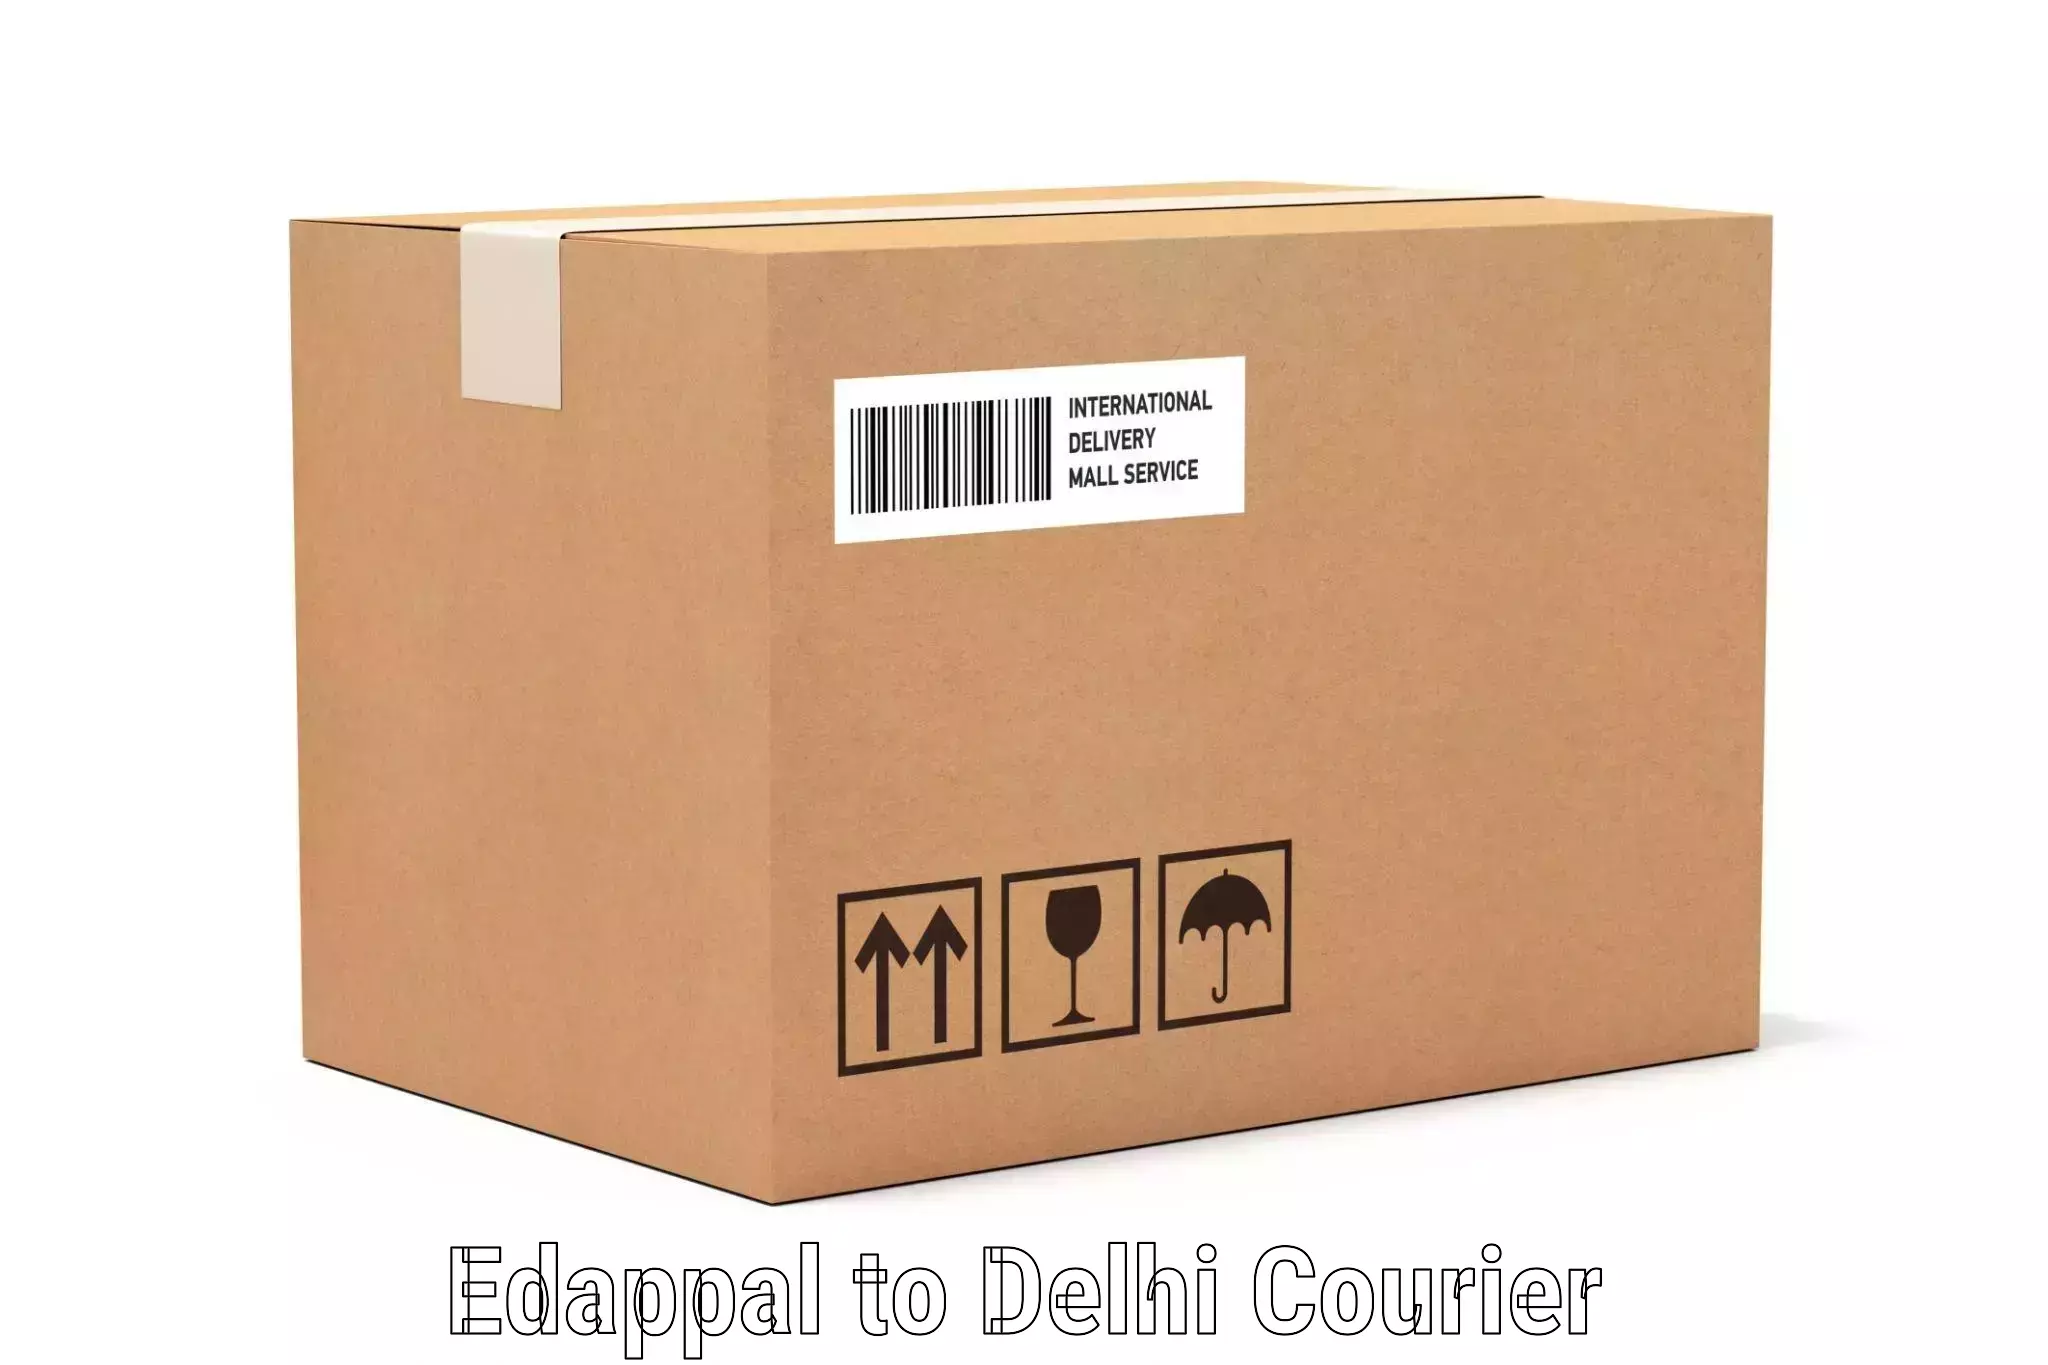 Personal effects shipping Edappal to East Delhi